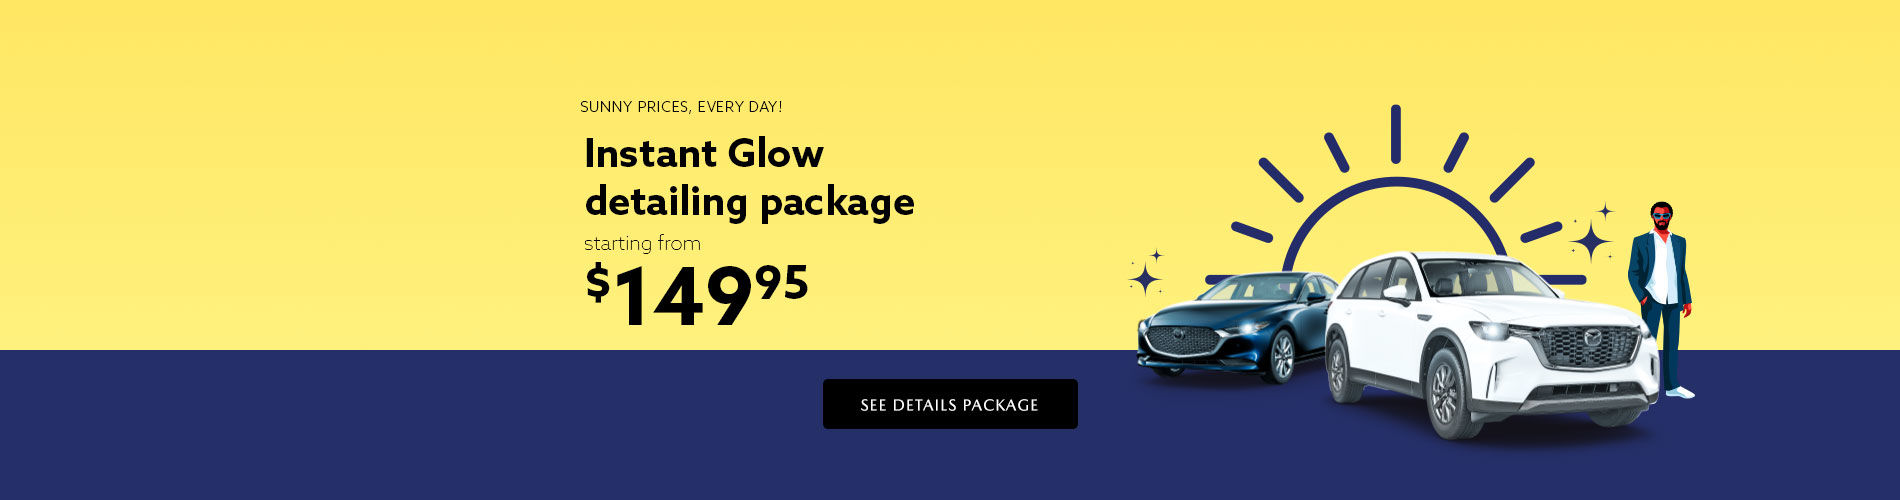 Instant Glow detailing package starting from $149.95